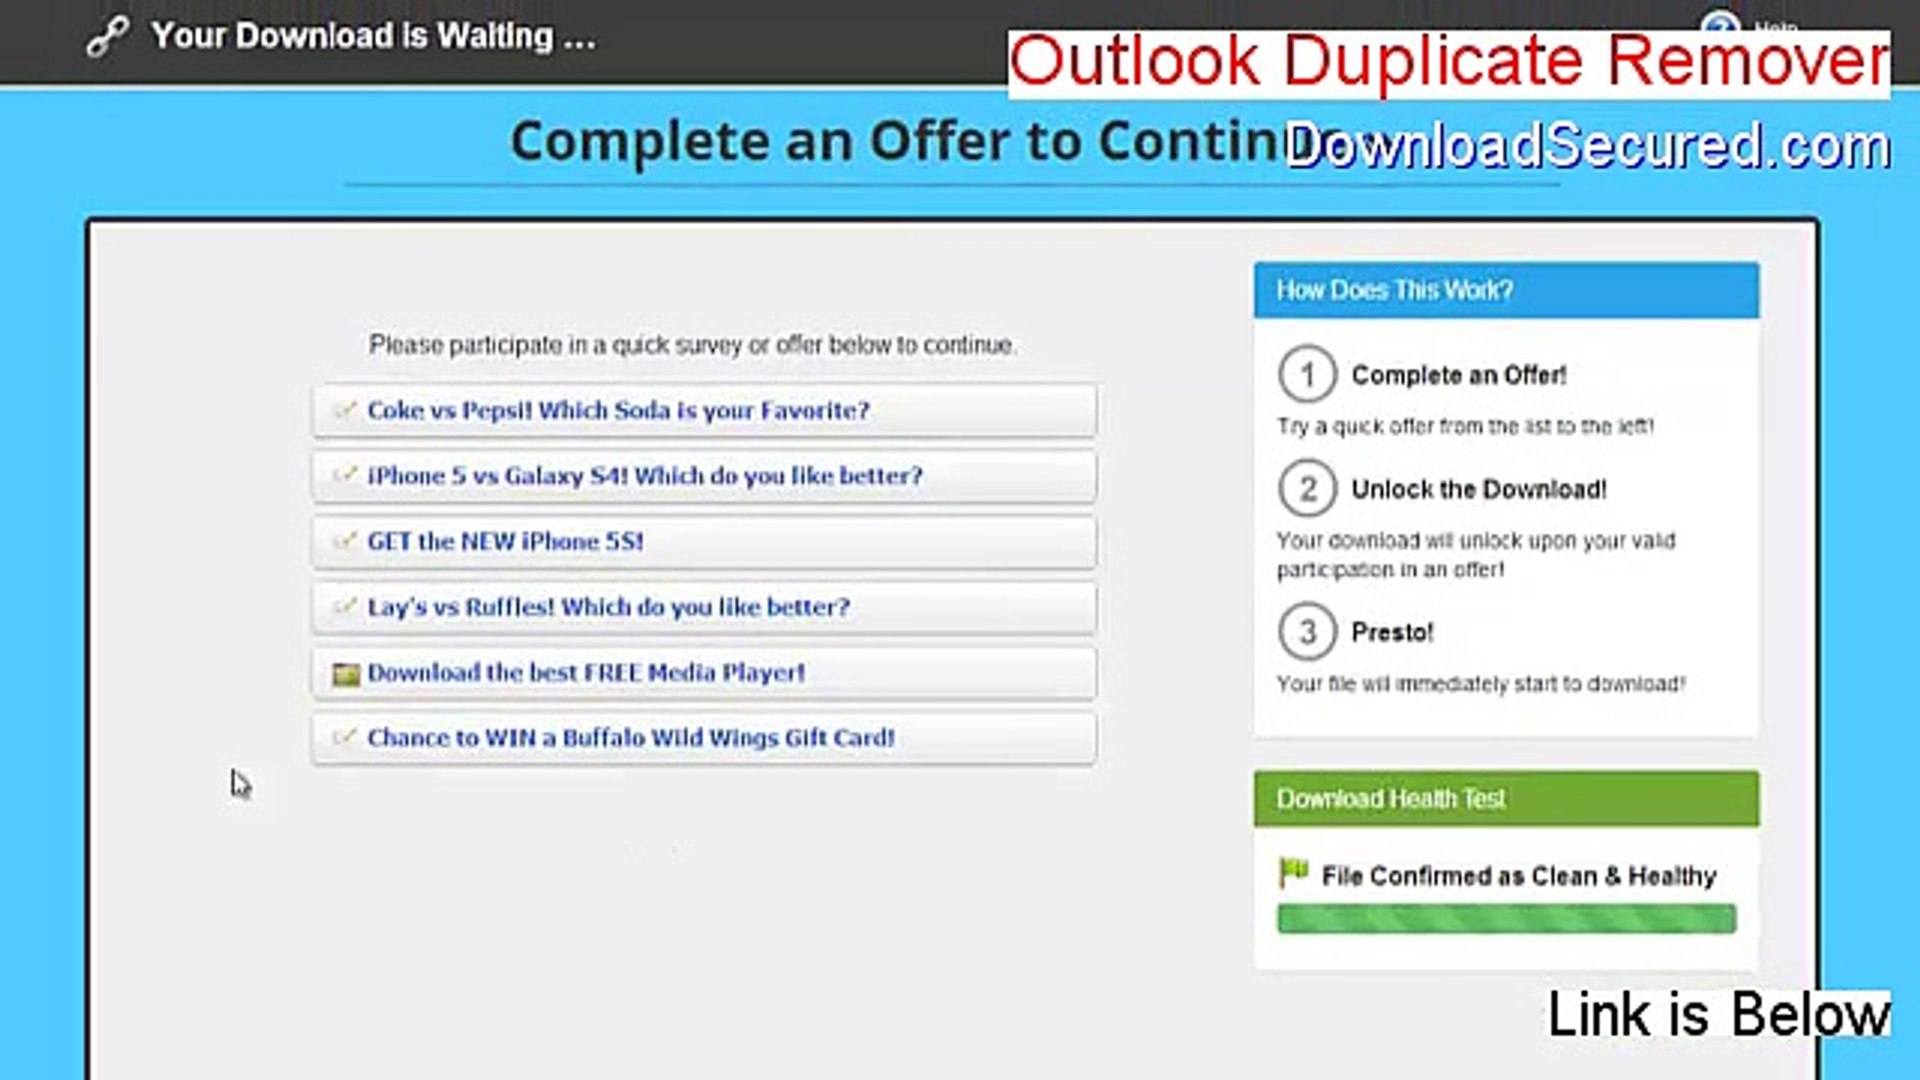 Outlook Duplicate Remover Cracked (Download Now) - video Dailymotion